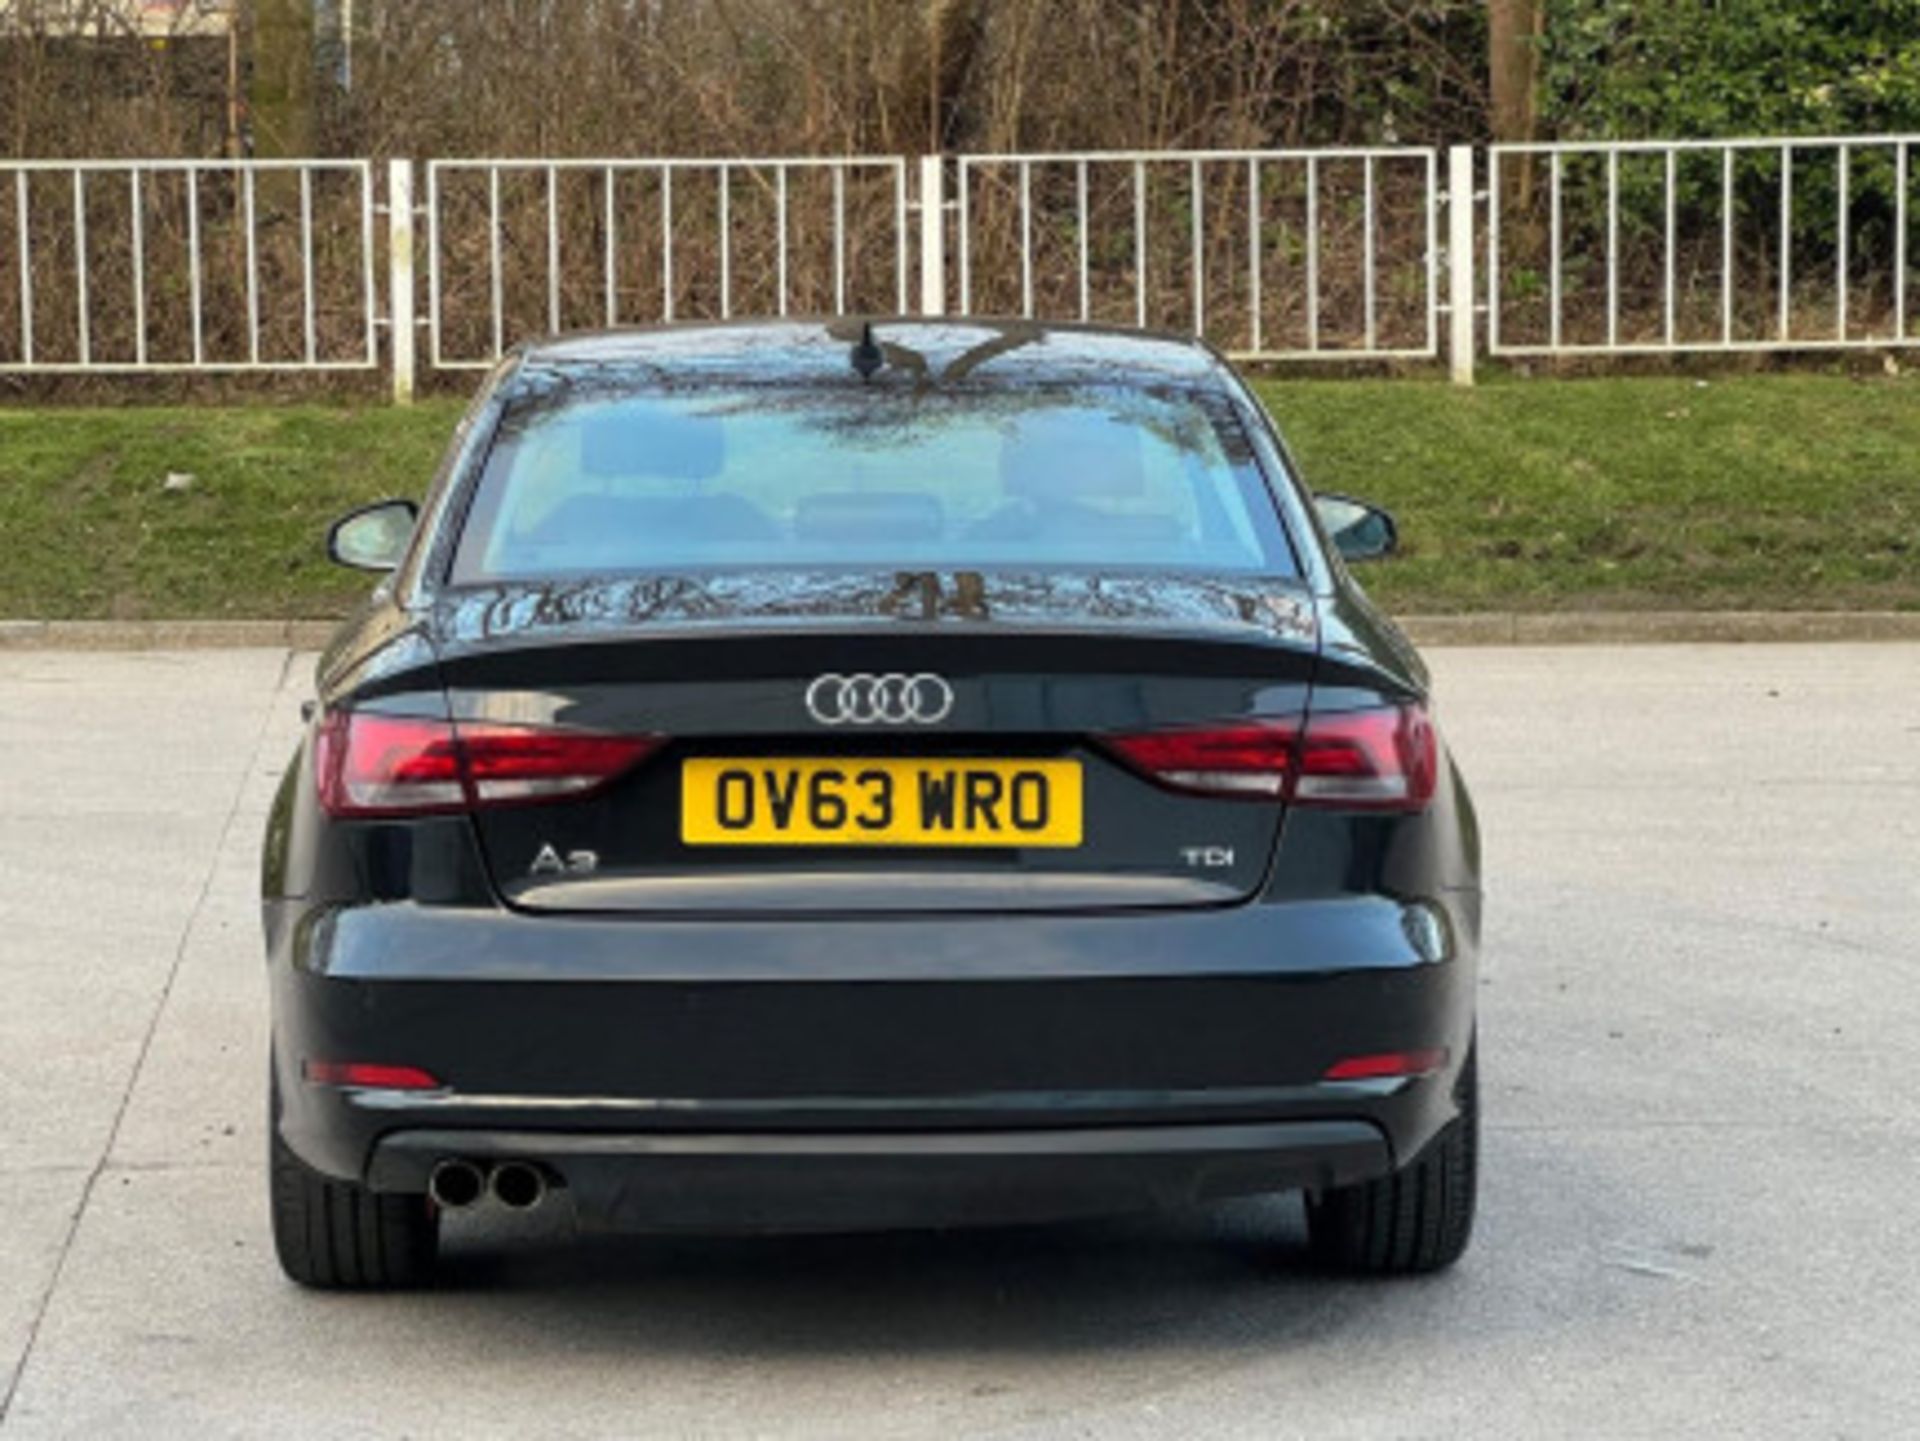 AUDI A3 2.0TDI SPORTBACK - STYLE, PERFORMANCE, AND COMFORT COMBINED >>--NO VAT ON HAMMER--<< - Image 18 of 216